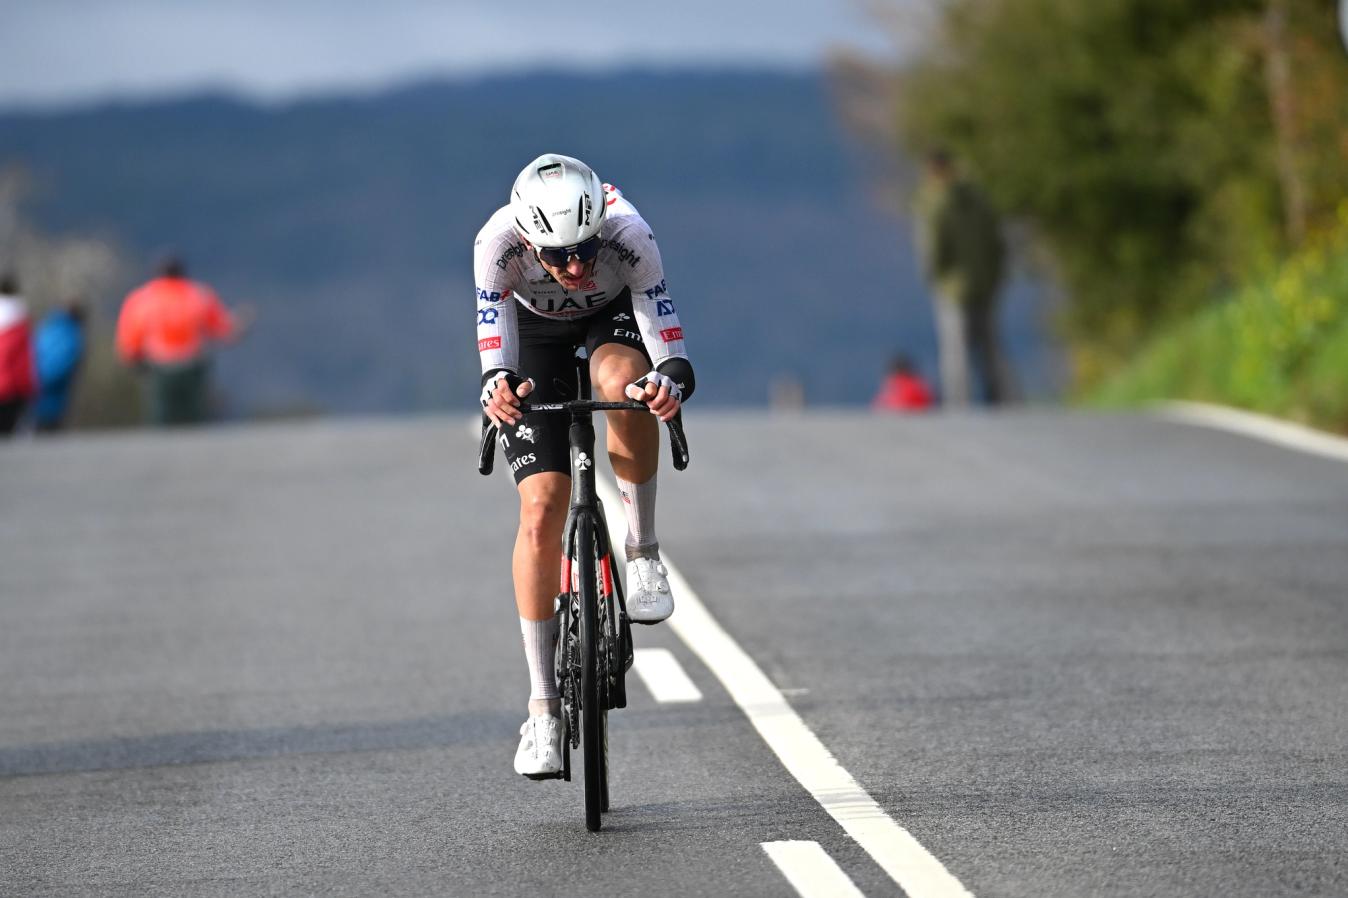 On the attack, McNulty stakes his claim to be UAE Team Emirates' protected rider at Itzulia